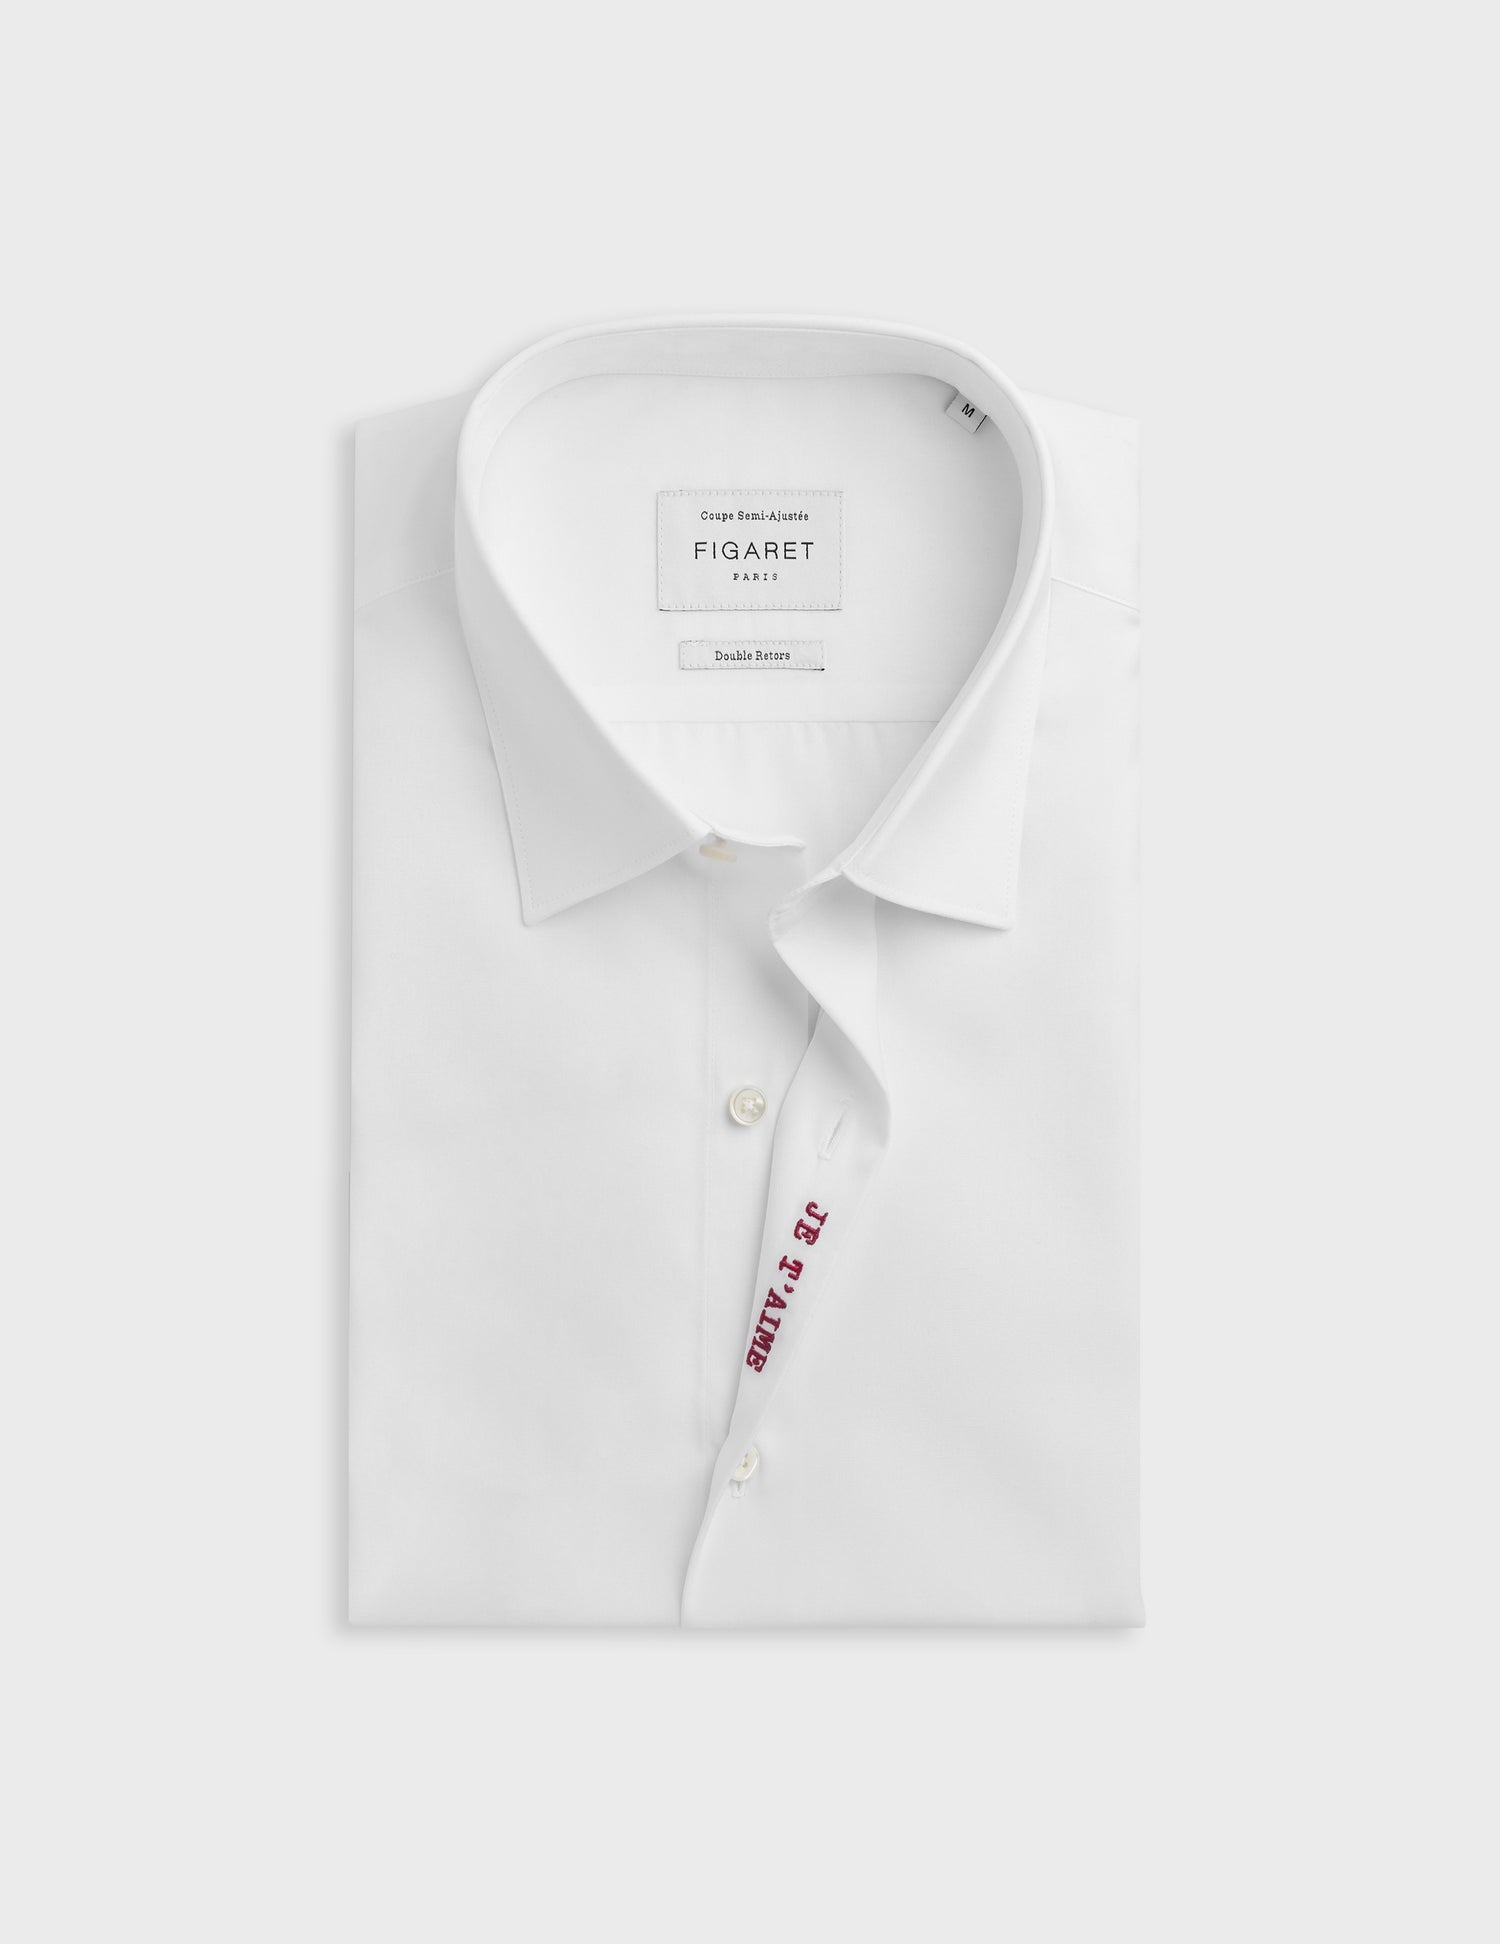 White "Je t'aime" shirt with red embroidery - Poplin - Figaret Collar#10